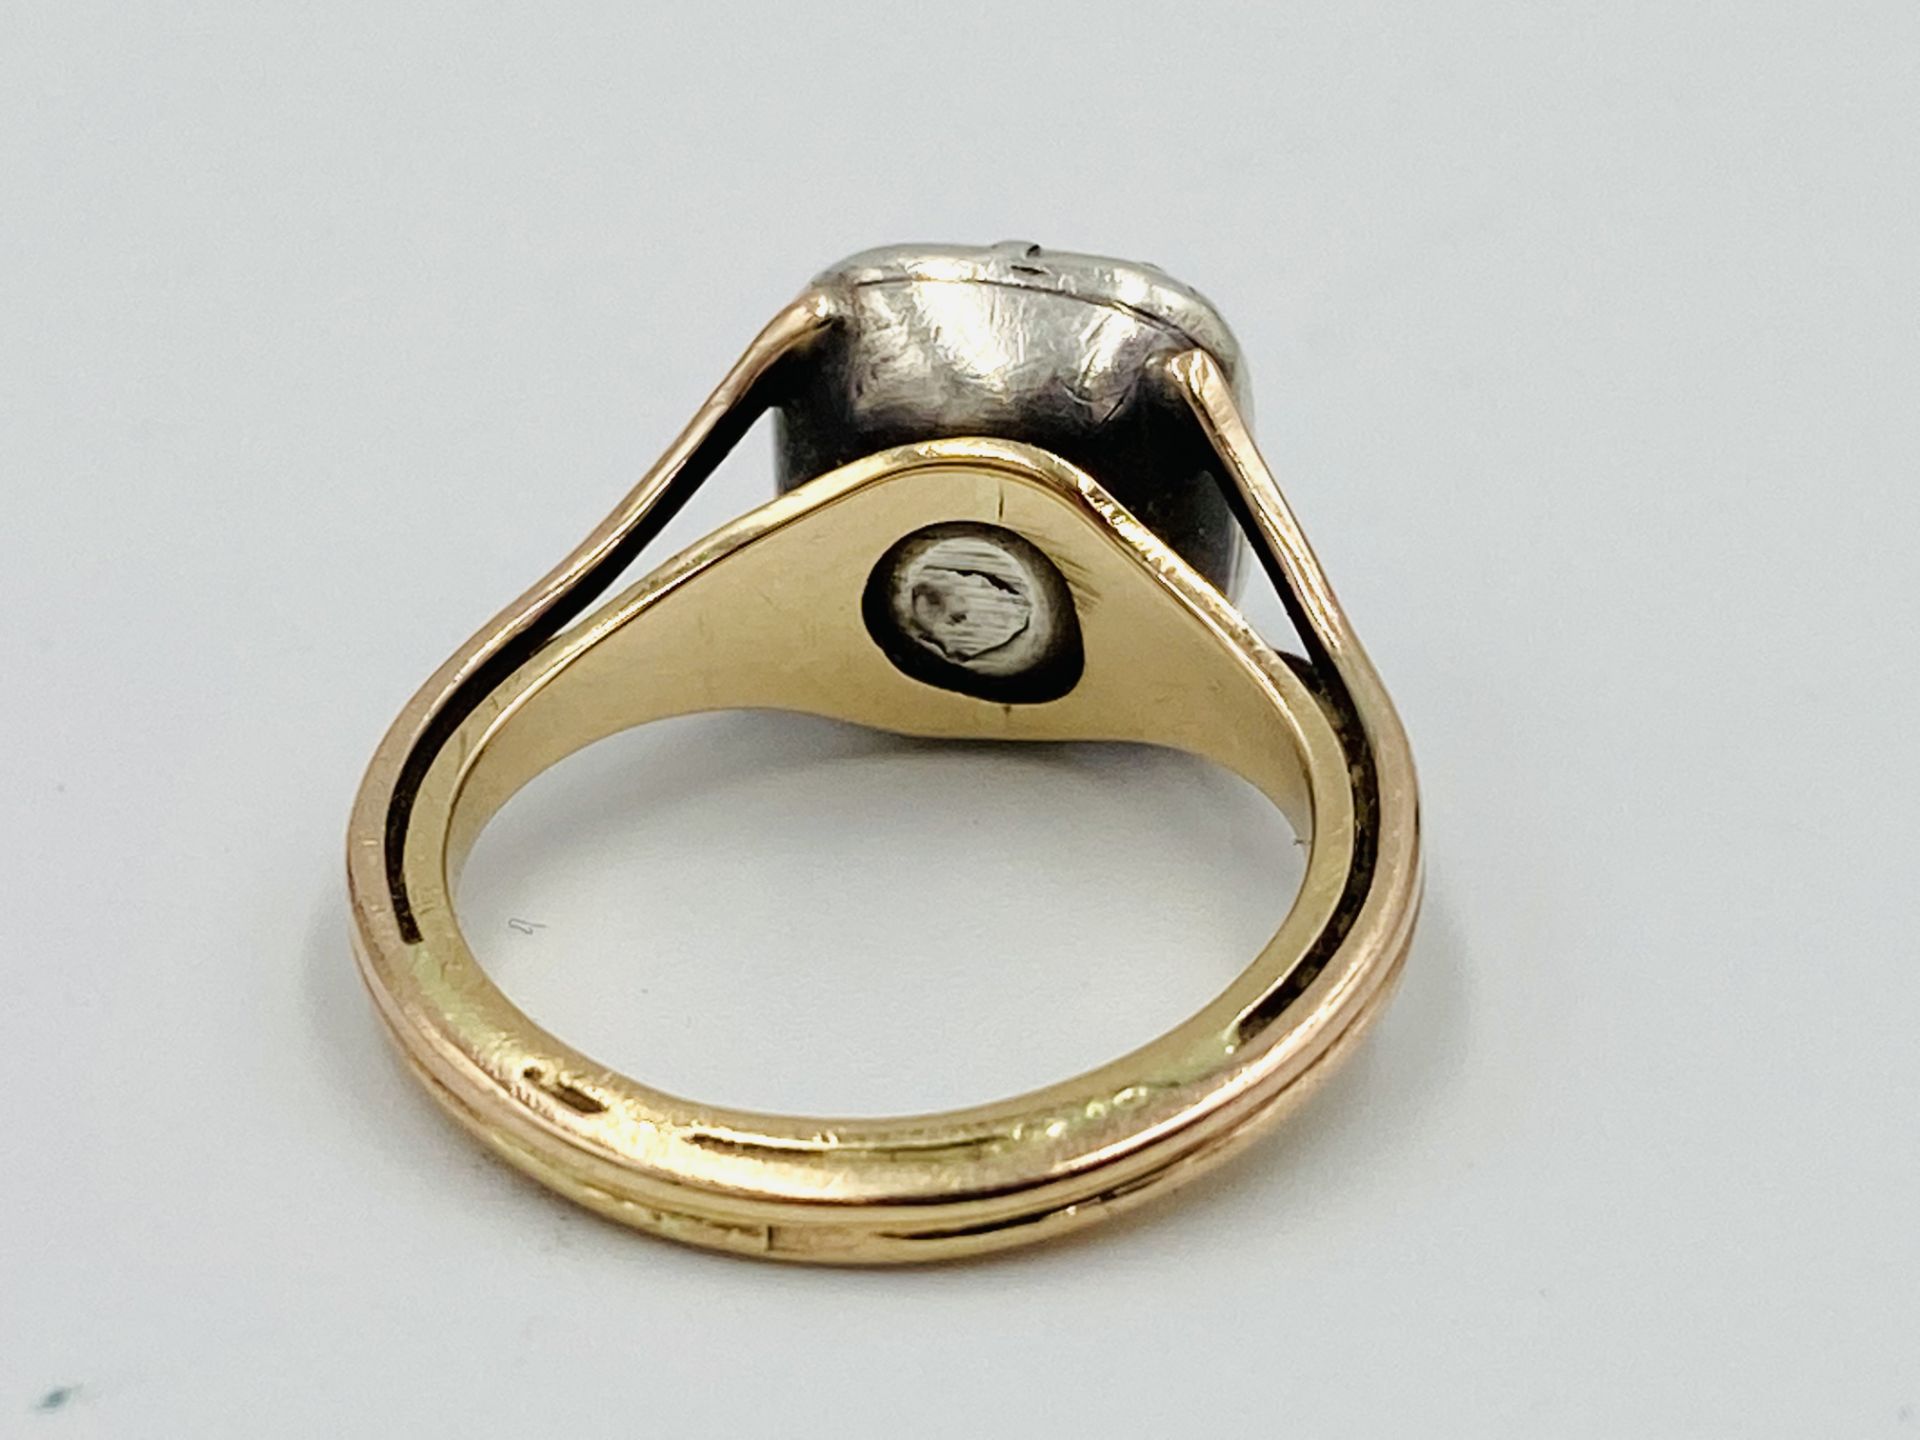 18th century gold ring - Image 4 of 6